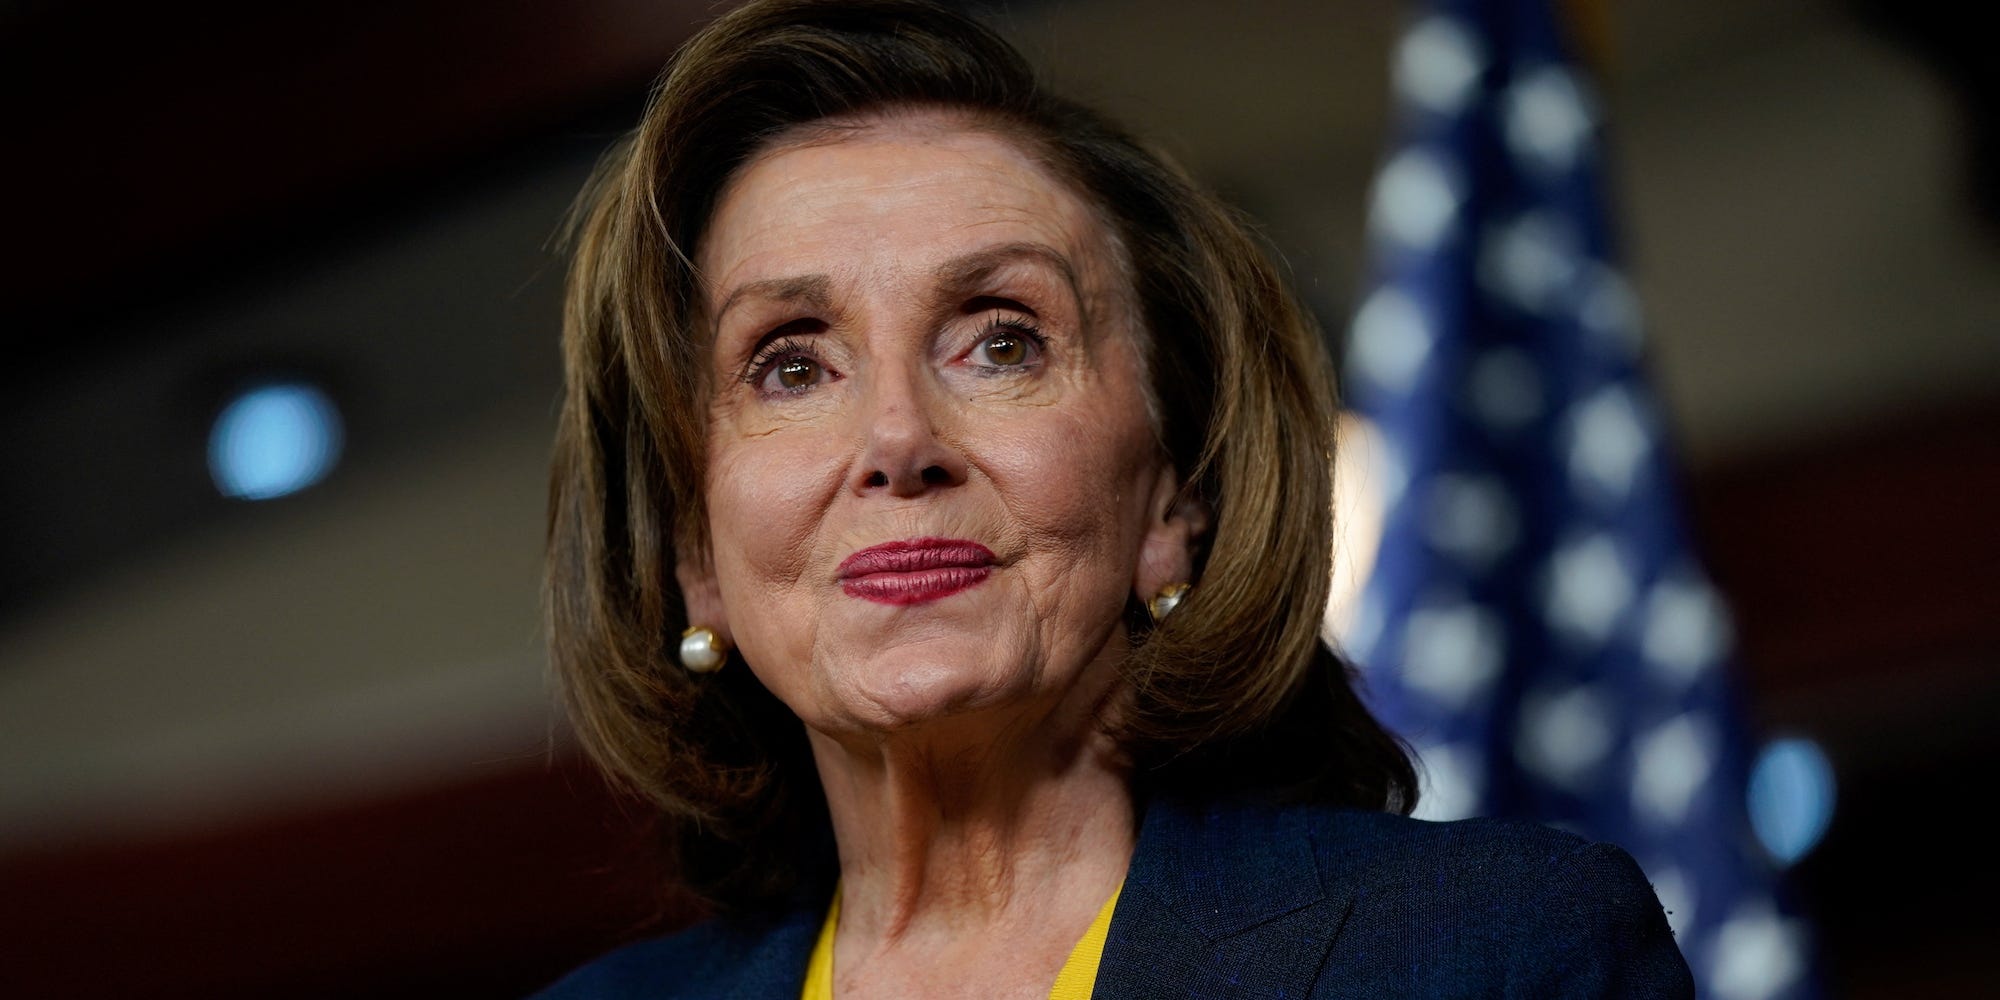 House Speaker Nancy Pelosi speaks to reporters during her weekly news conference on Capitol Hill on December 15, 2021.